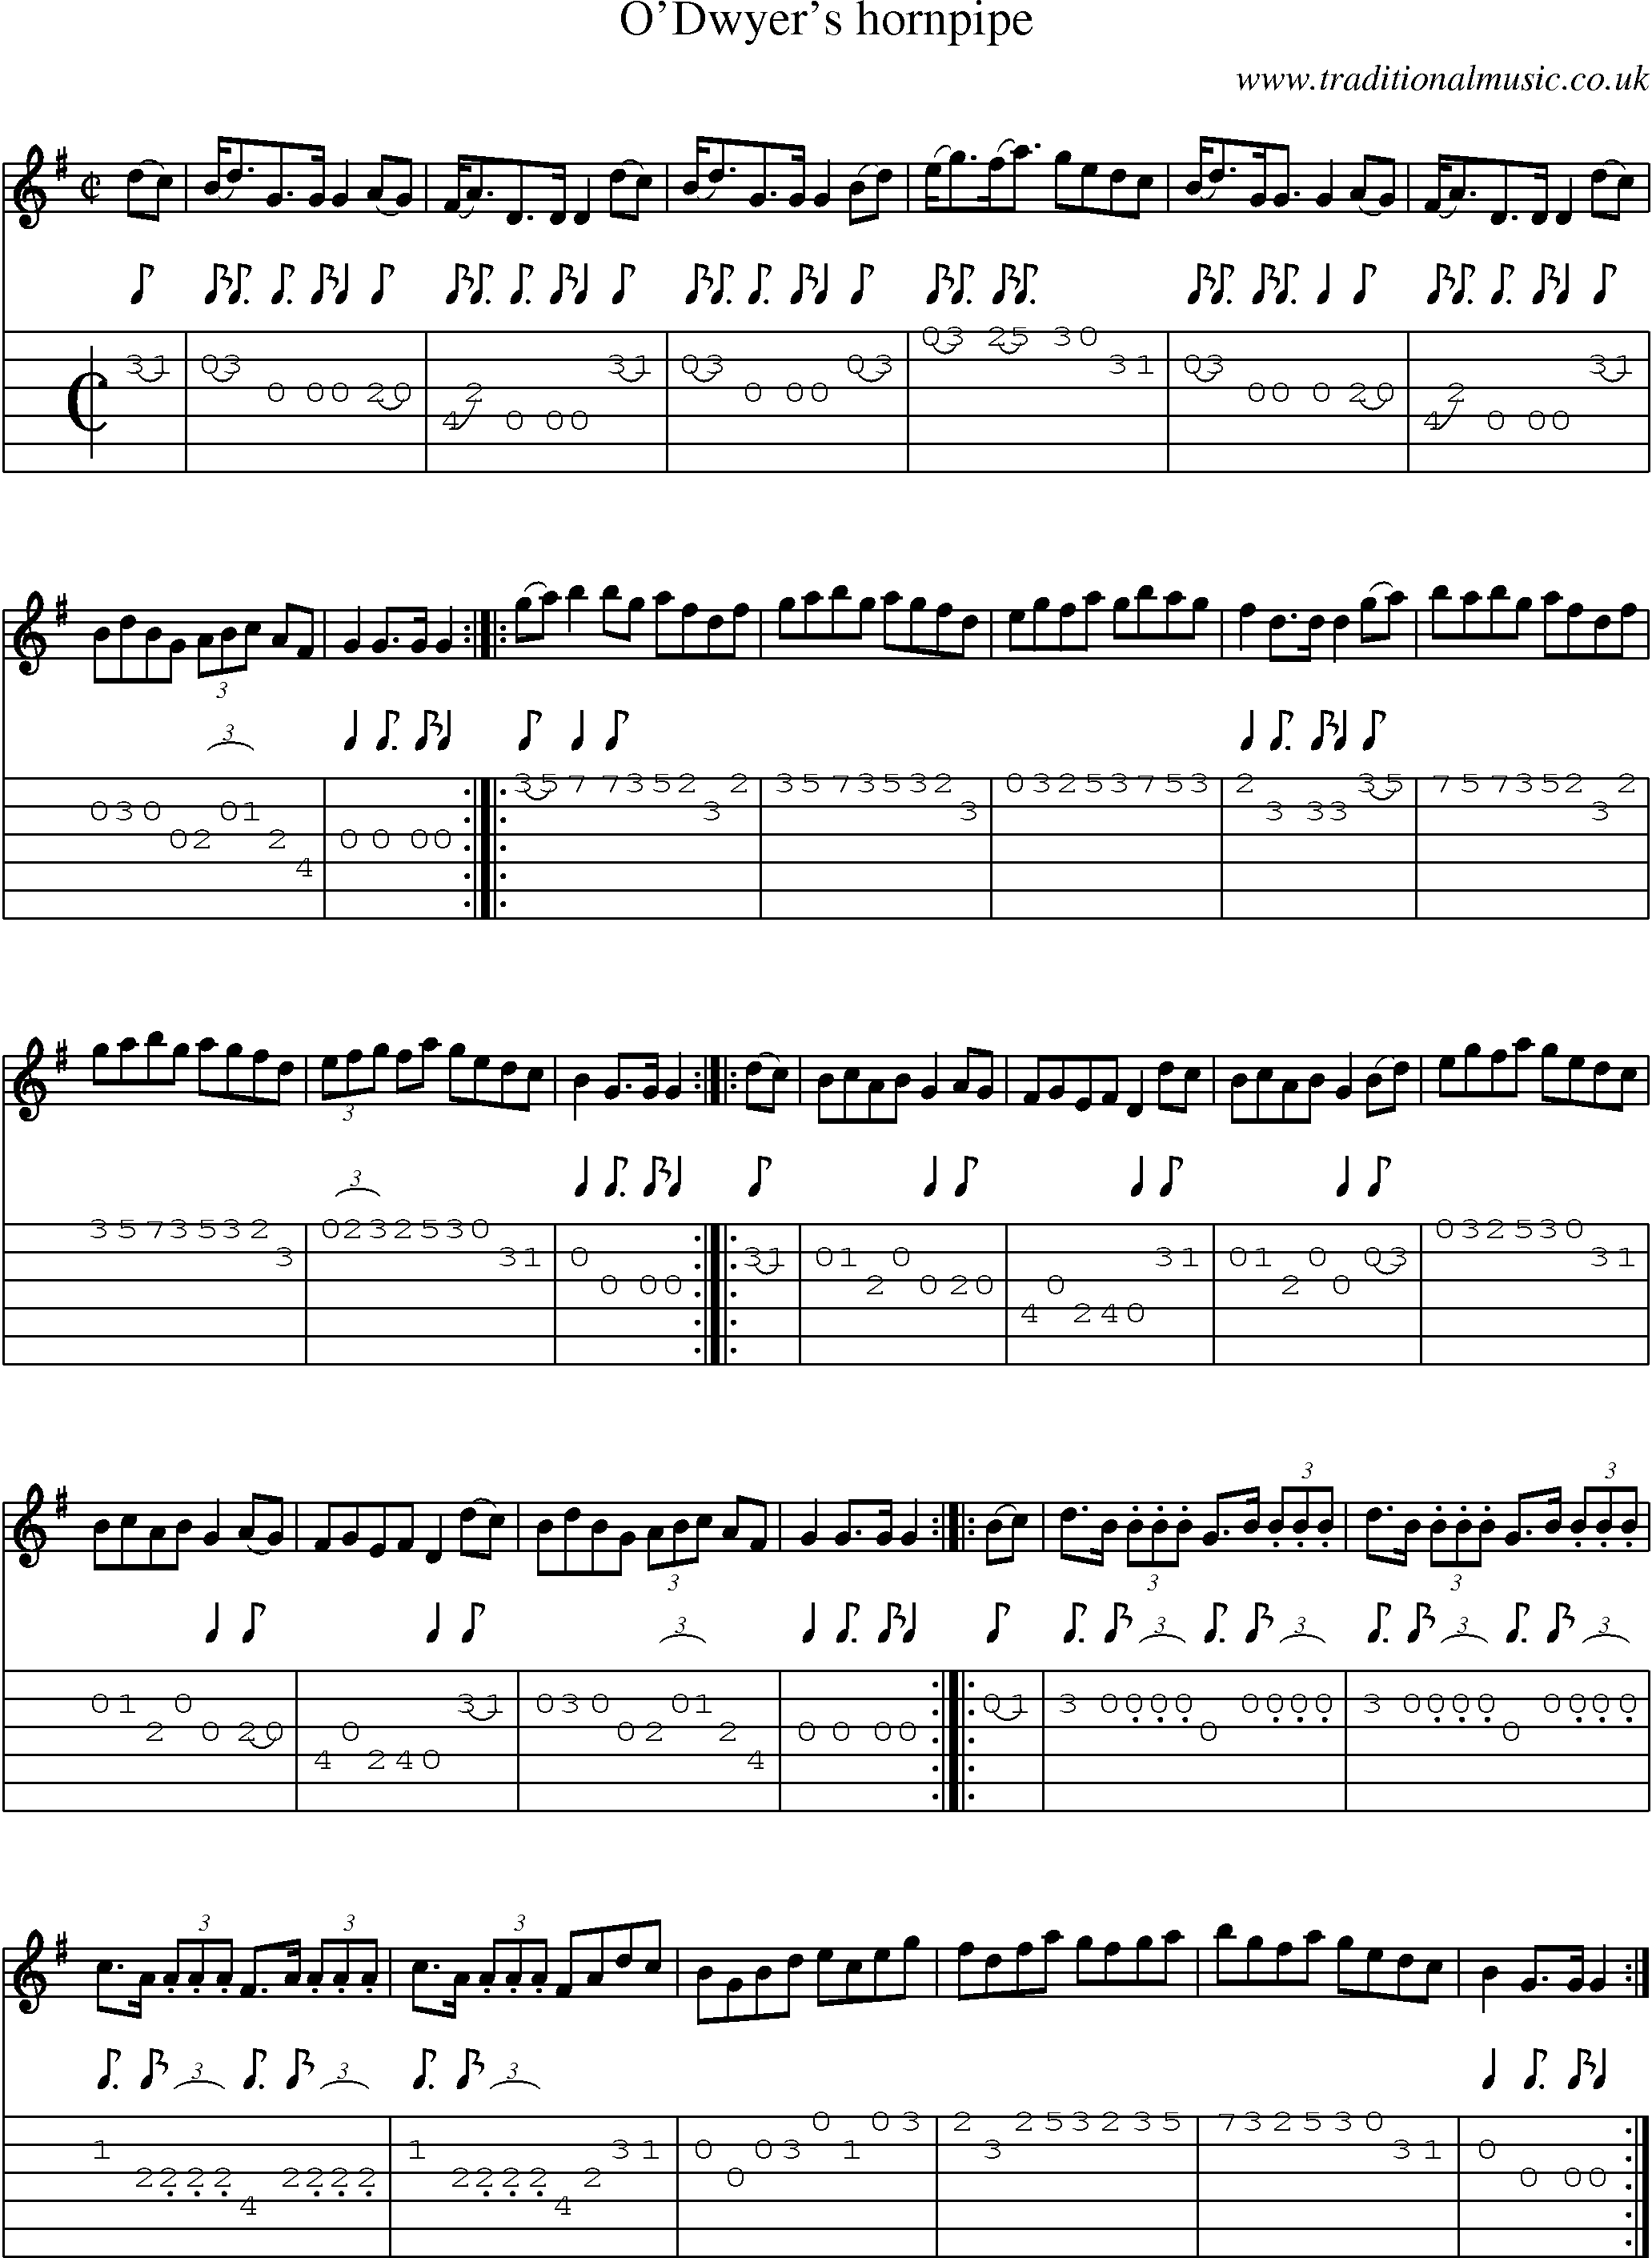 Music Score and Guitar Tabs for O Dwyers Hornpipe